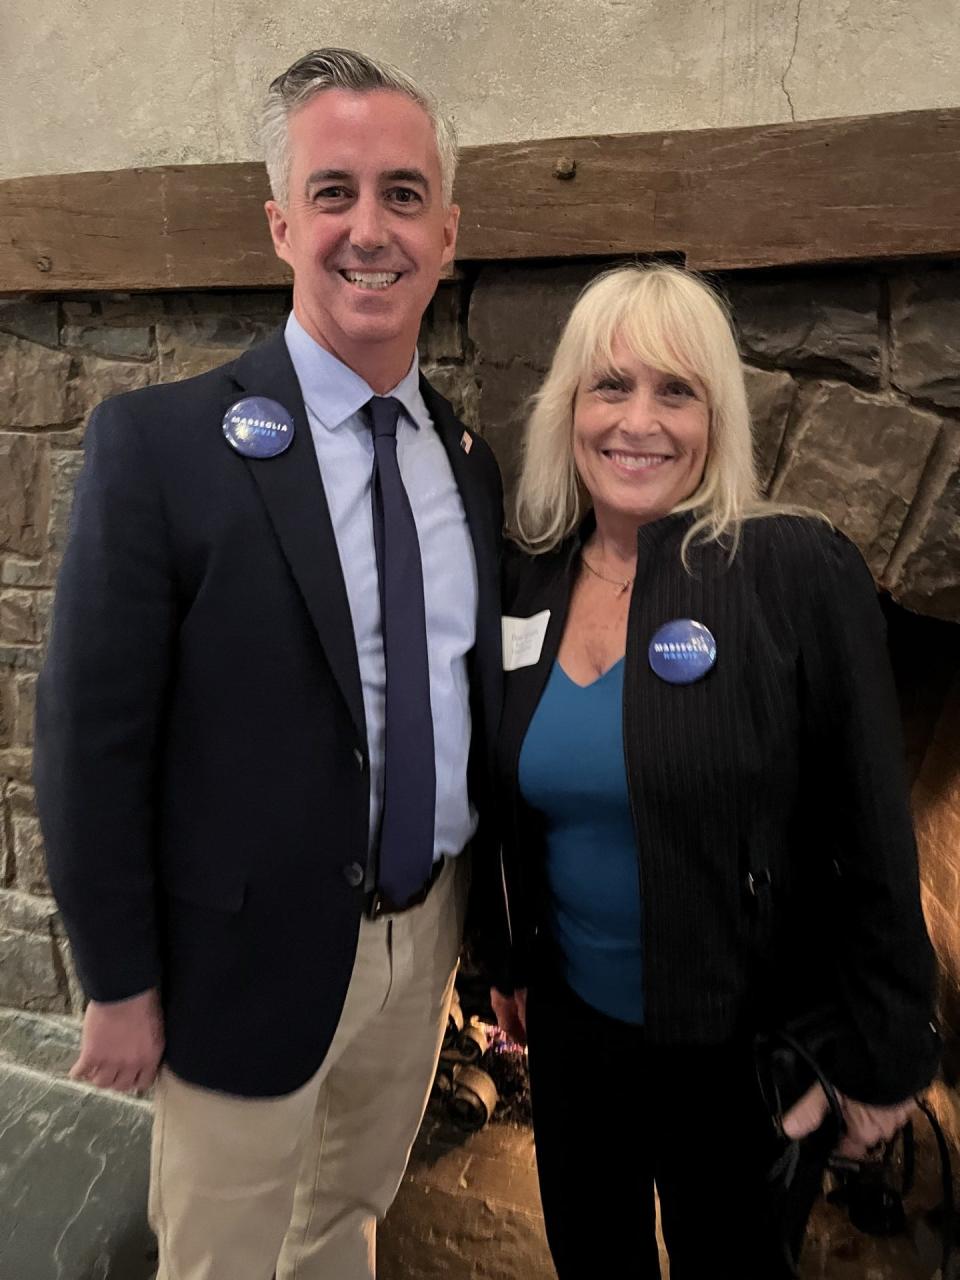 Bucks County Commissioner Chairman Bob Harvie and Commissioner Diane Ellis Marseglia, both Democrats, appeared elated as they posed at the Democratic post-election party Tuesday night at the Barley Sheaf Inn in Buckingham.